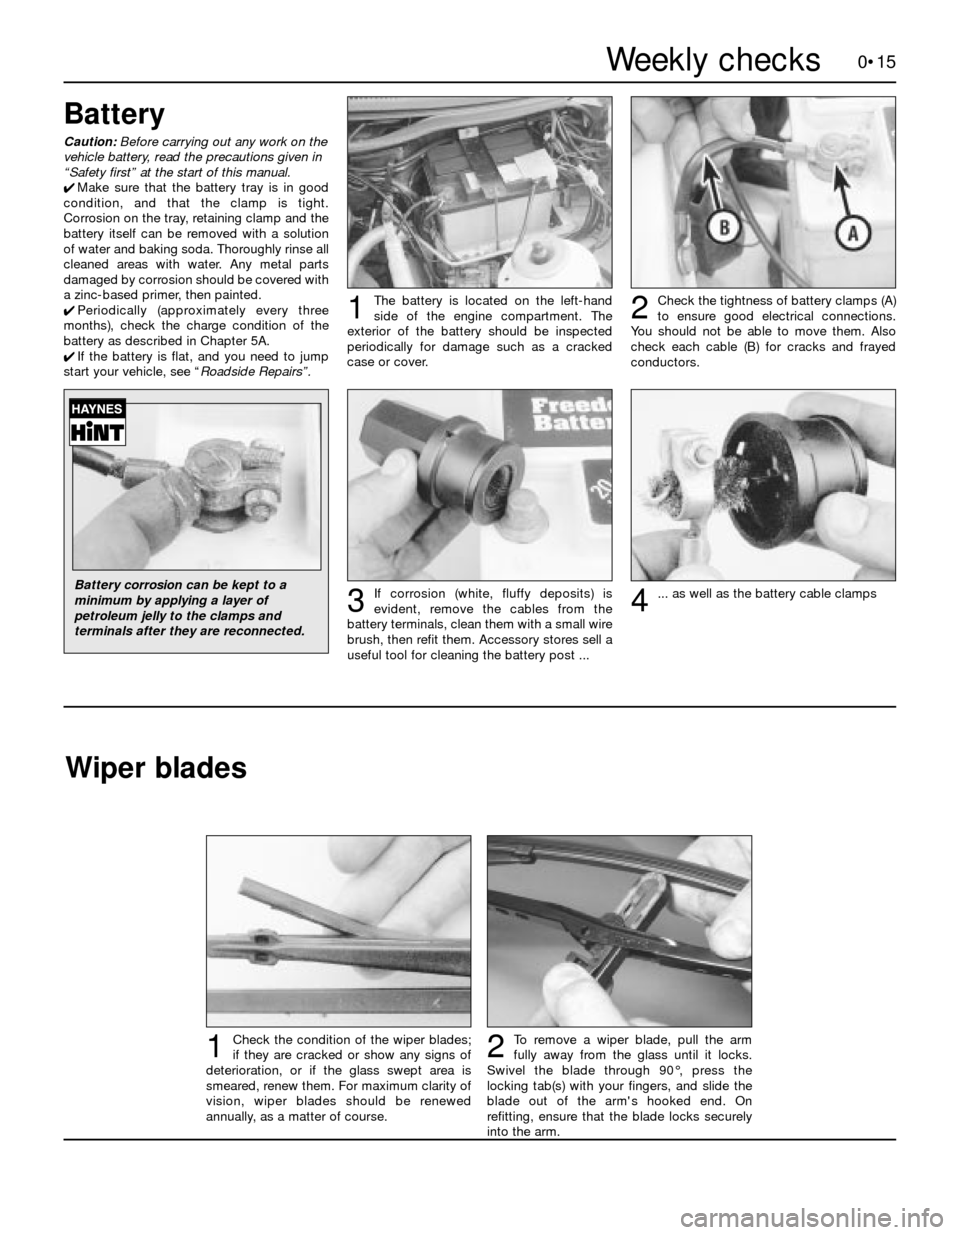 FORD SIERRA 1991 2.G Introduction User Guide 0•15
To remove a wiper blade, pull the arm
fully away from the glass until it locks.
Swivel the blade through 90°, press the
locking tab(s) with your fingers, and slide the
blade out of the arms h